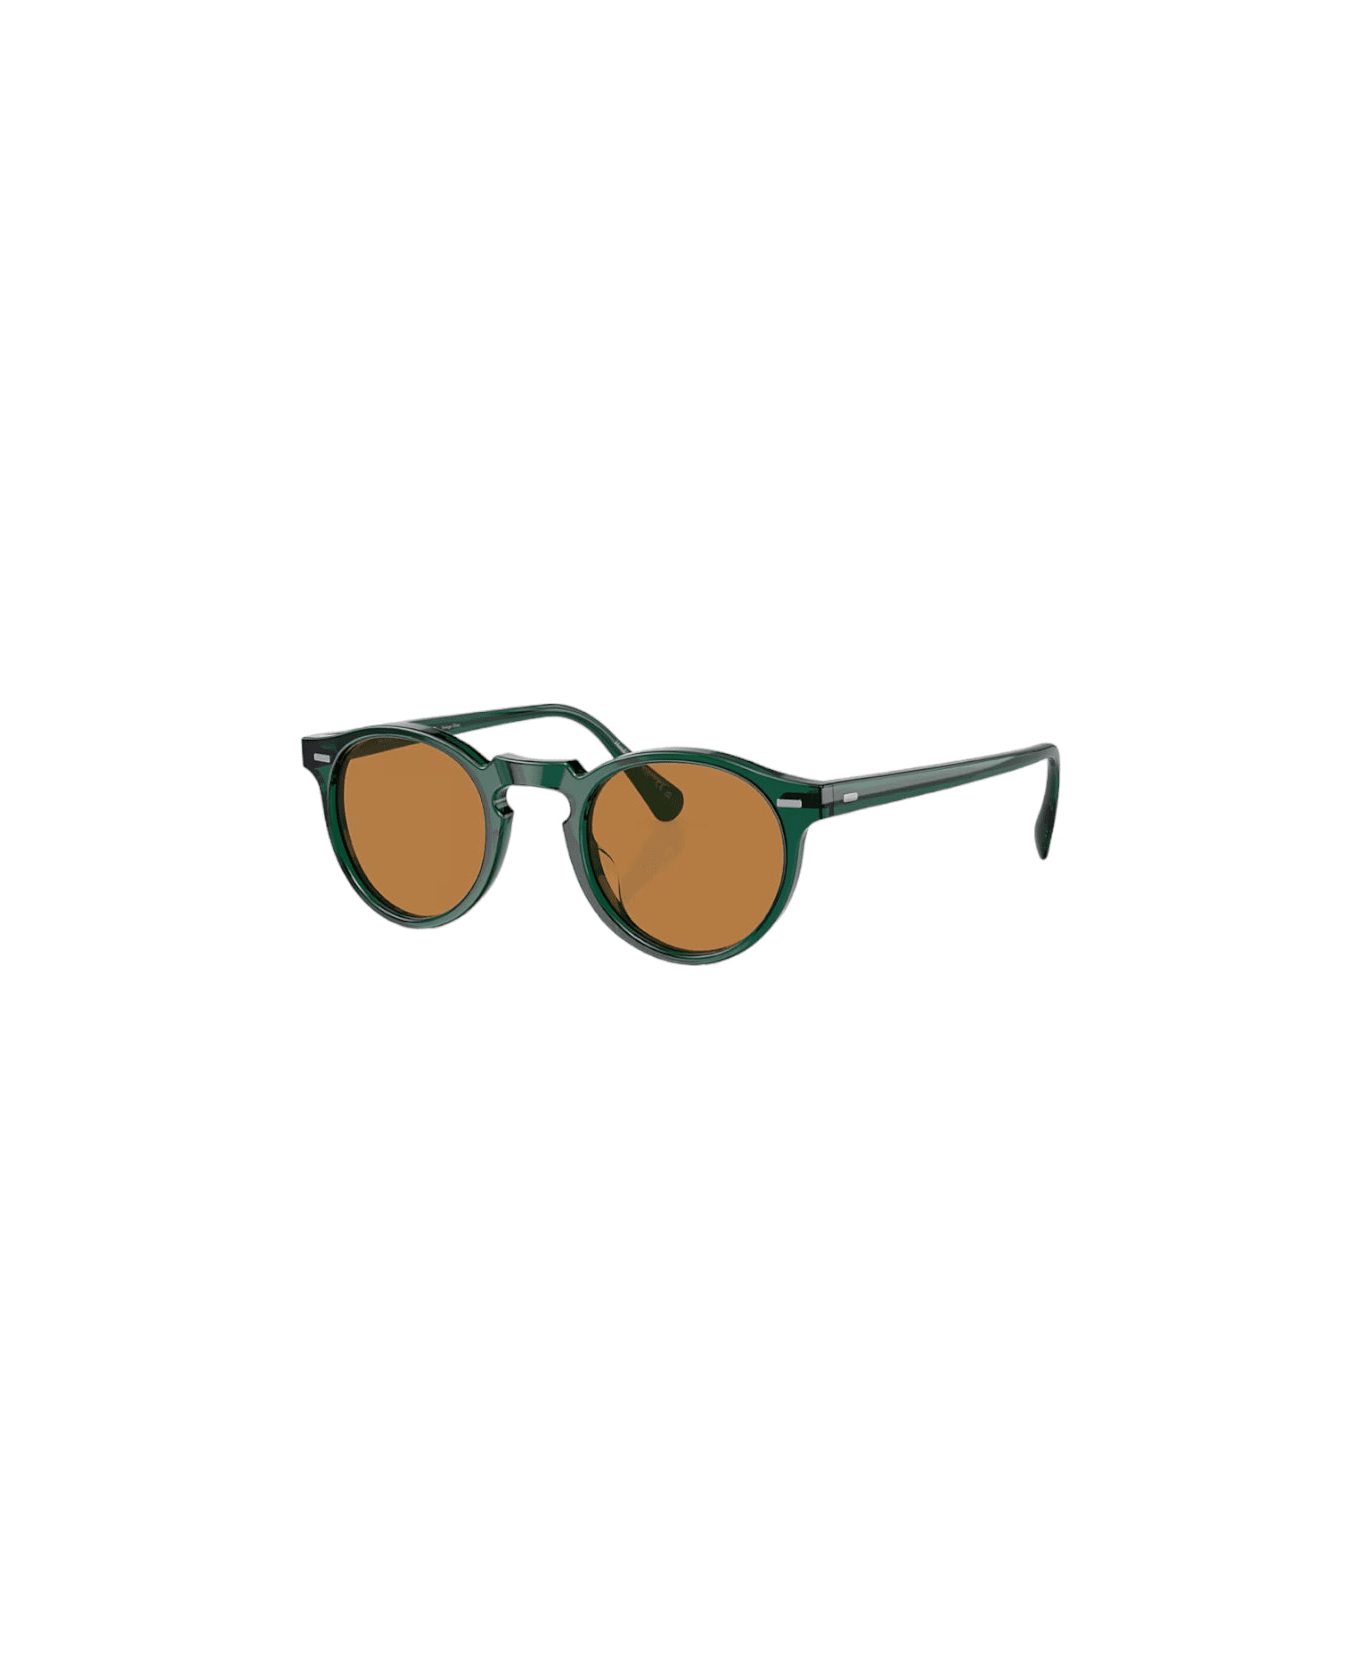 Oliver Peoples Gregory Peck Sun Sunglasses